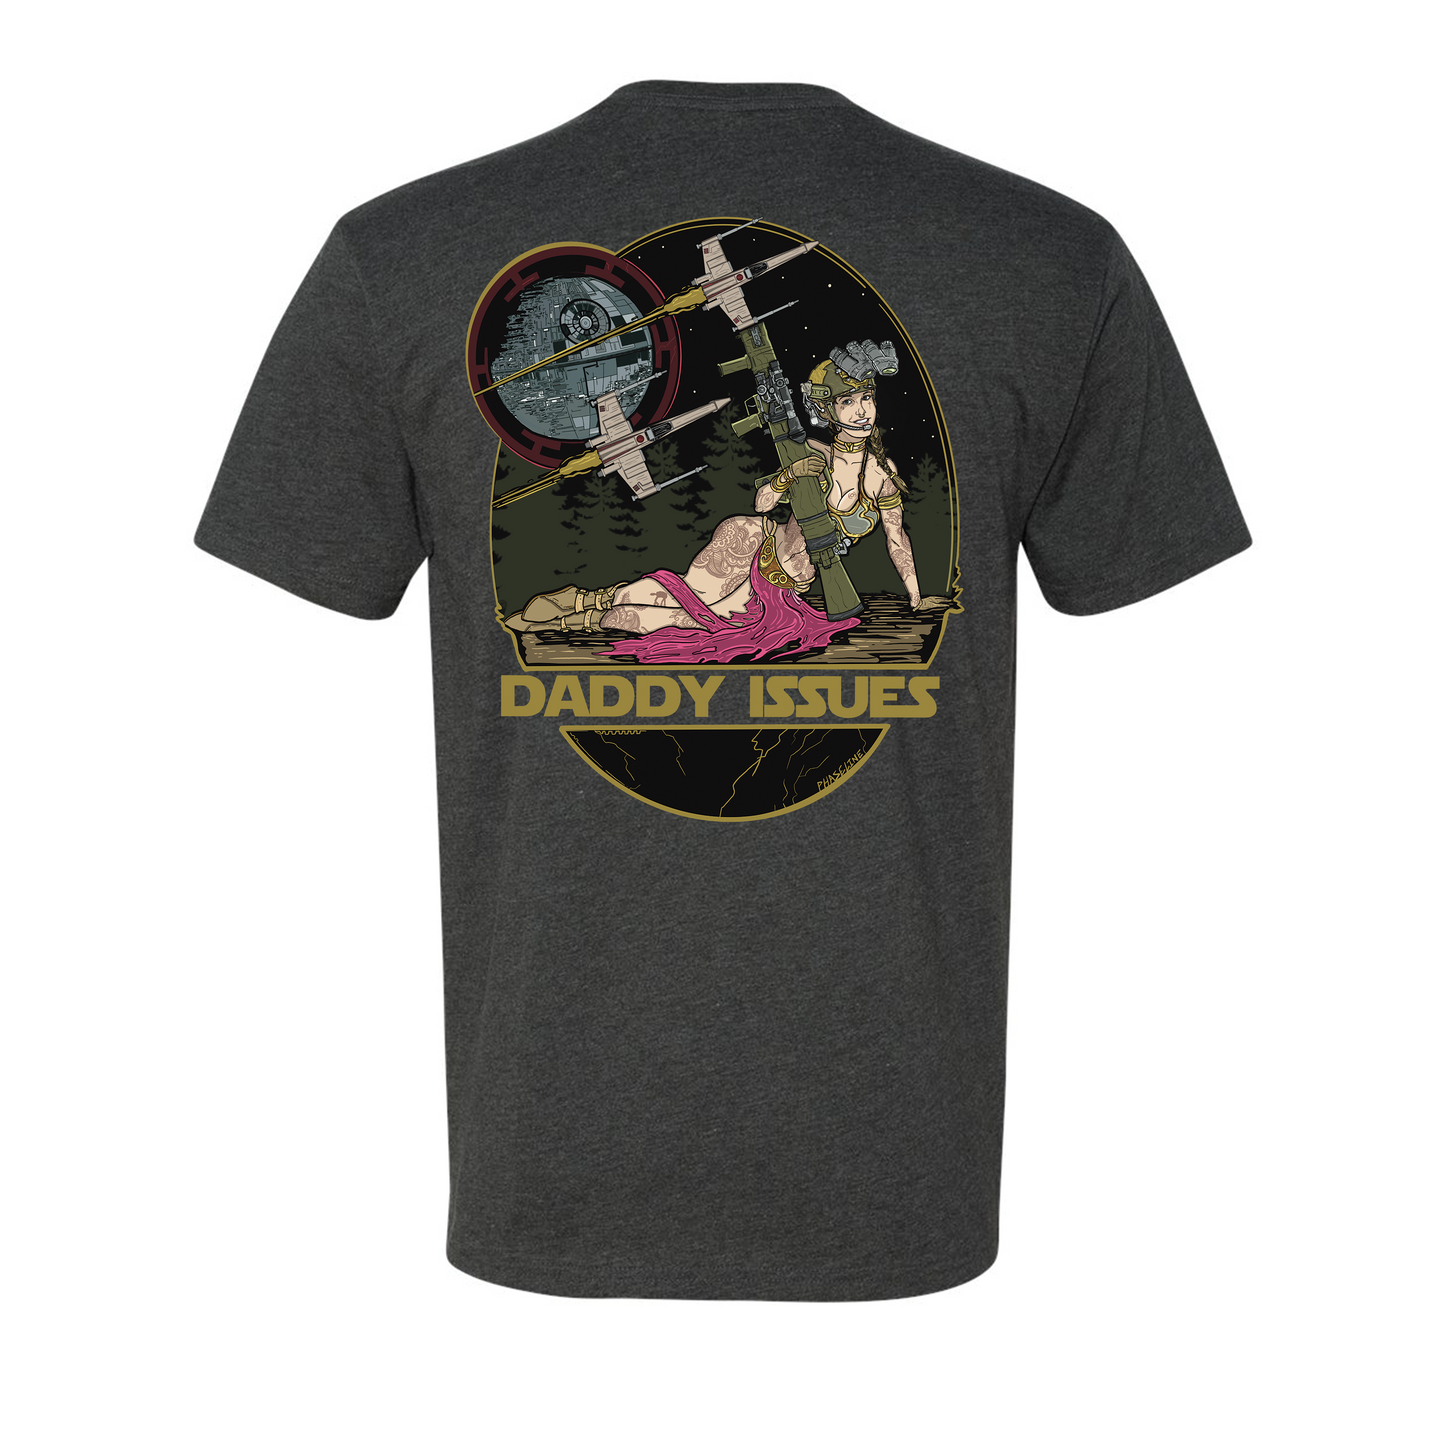 Daddy Issues Tee